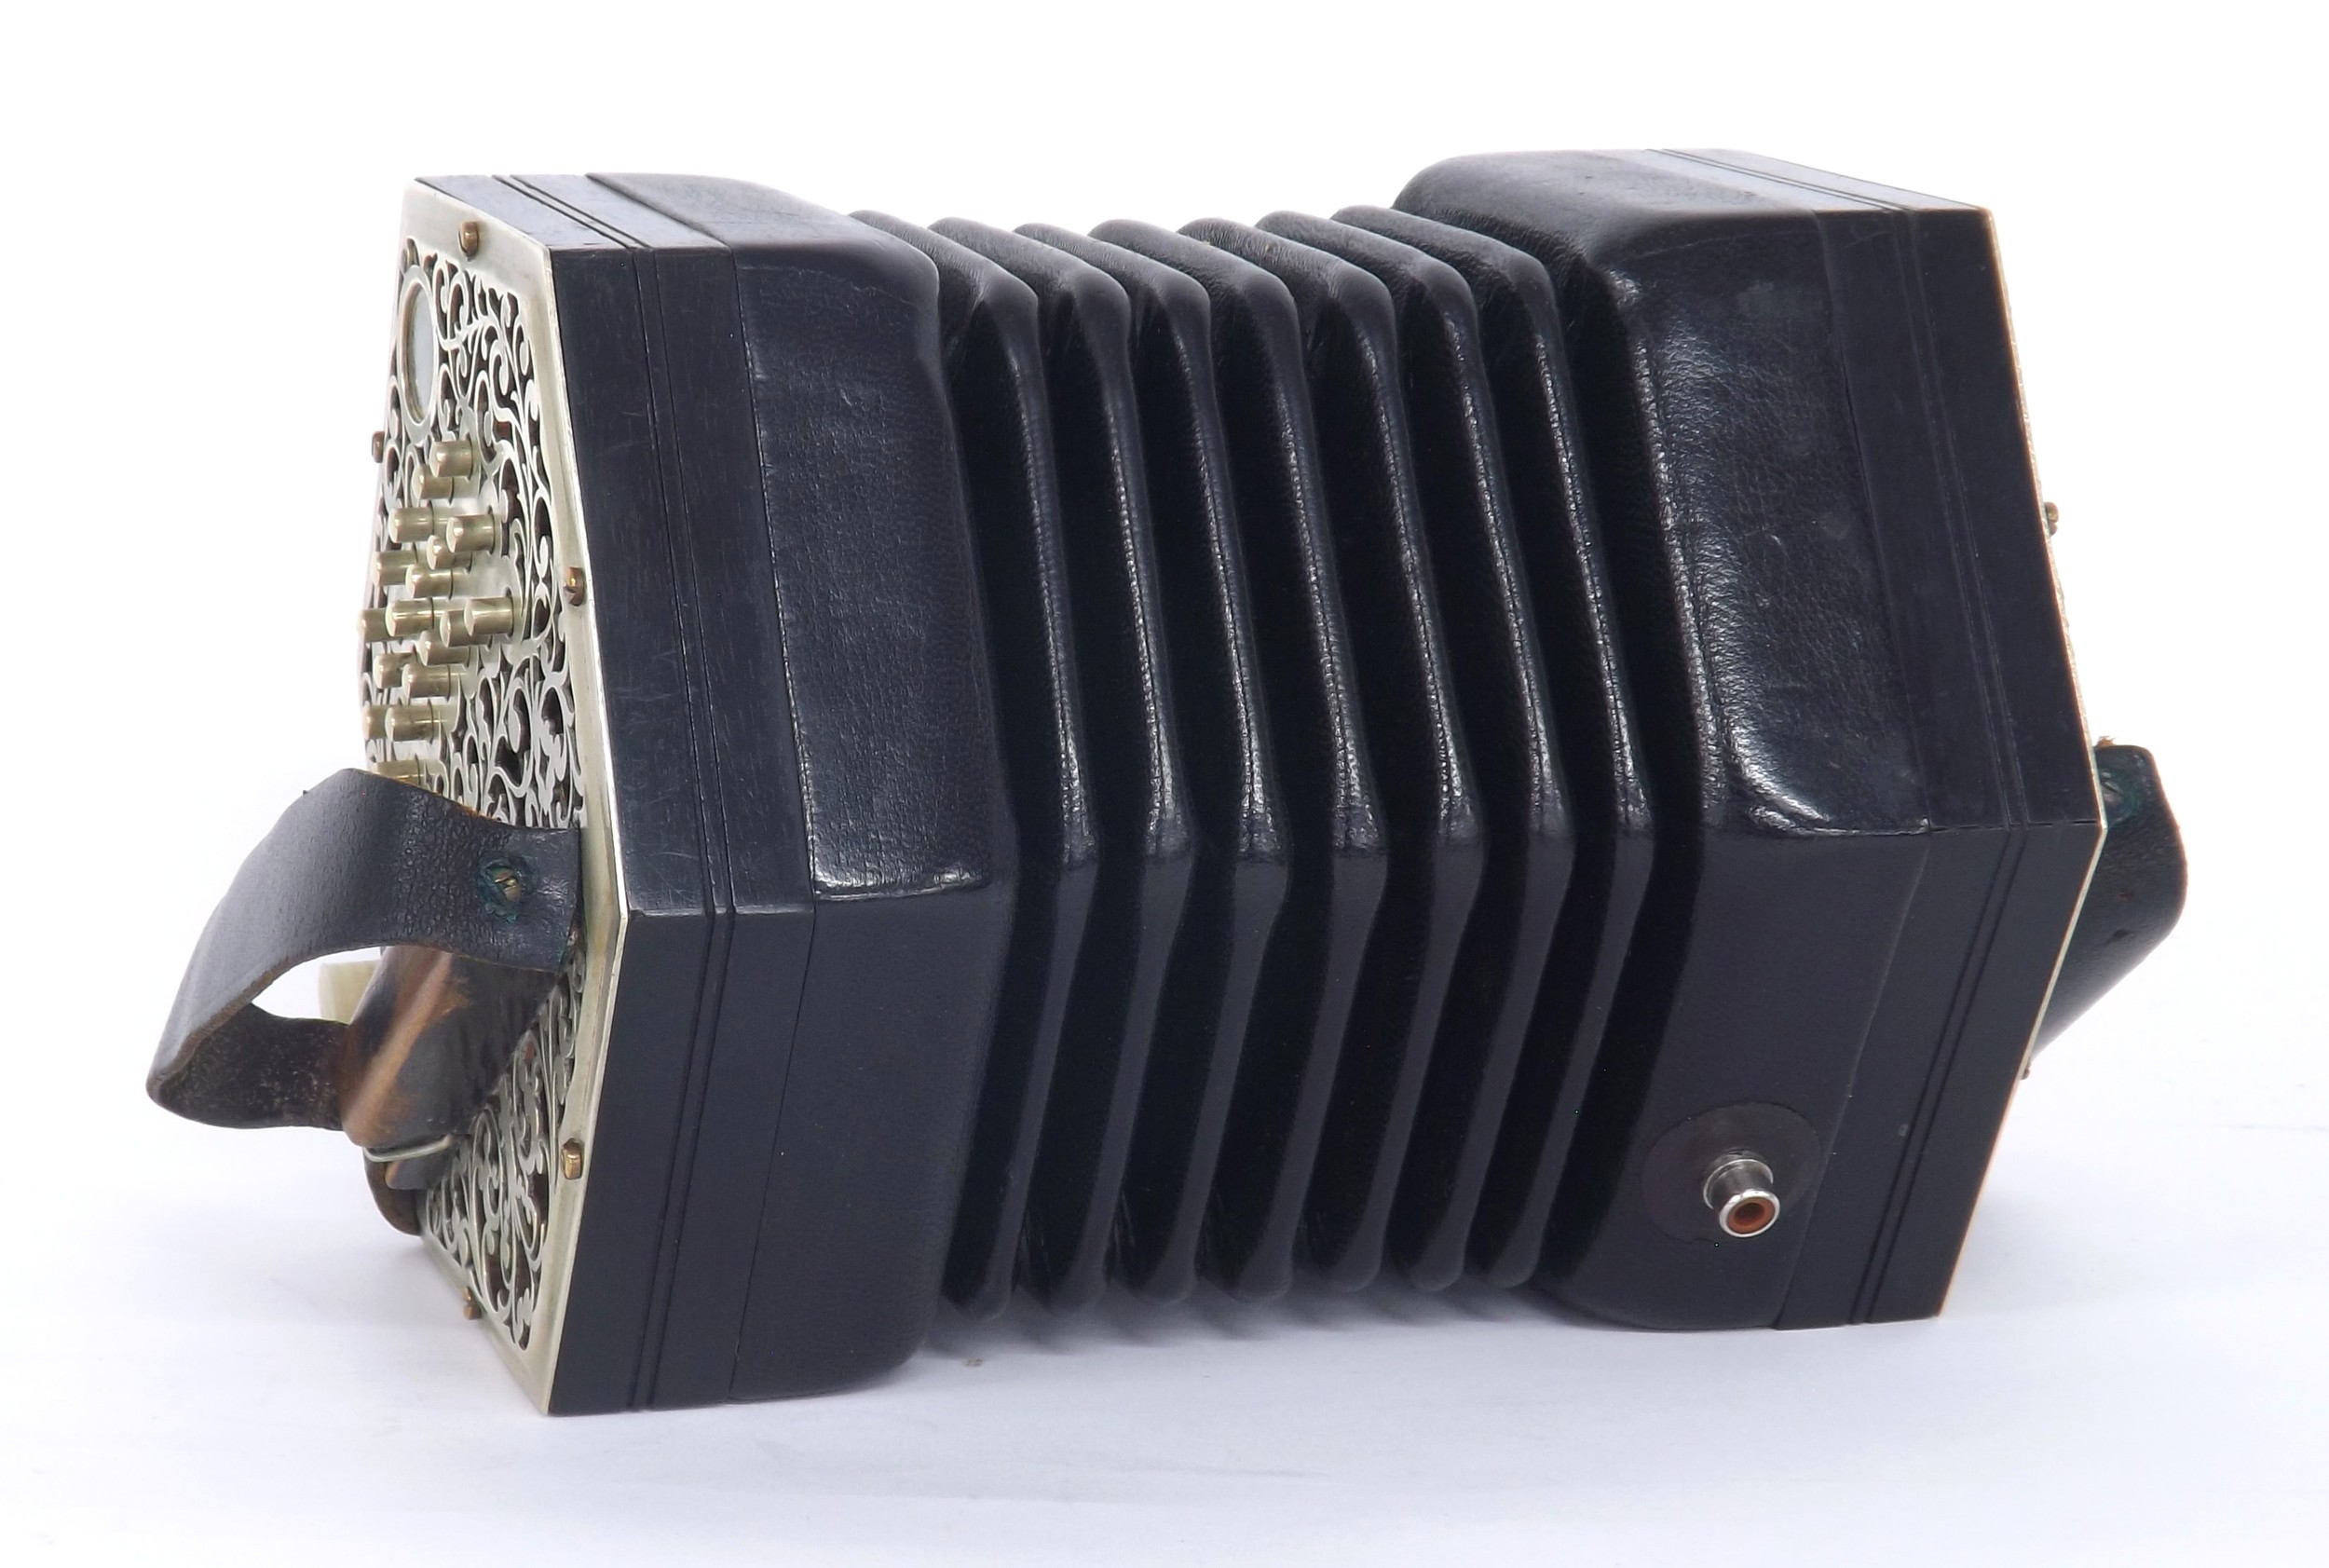 Fine Anglo concertina by and labelled Colin Dipper, no. 103, with thirty-four metal buttons on - Image 2 of 6